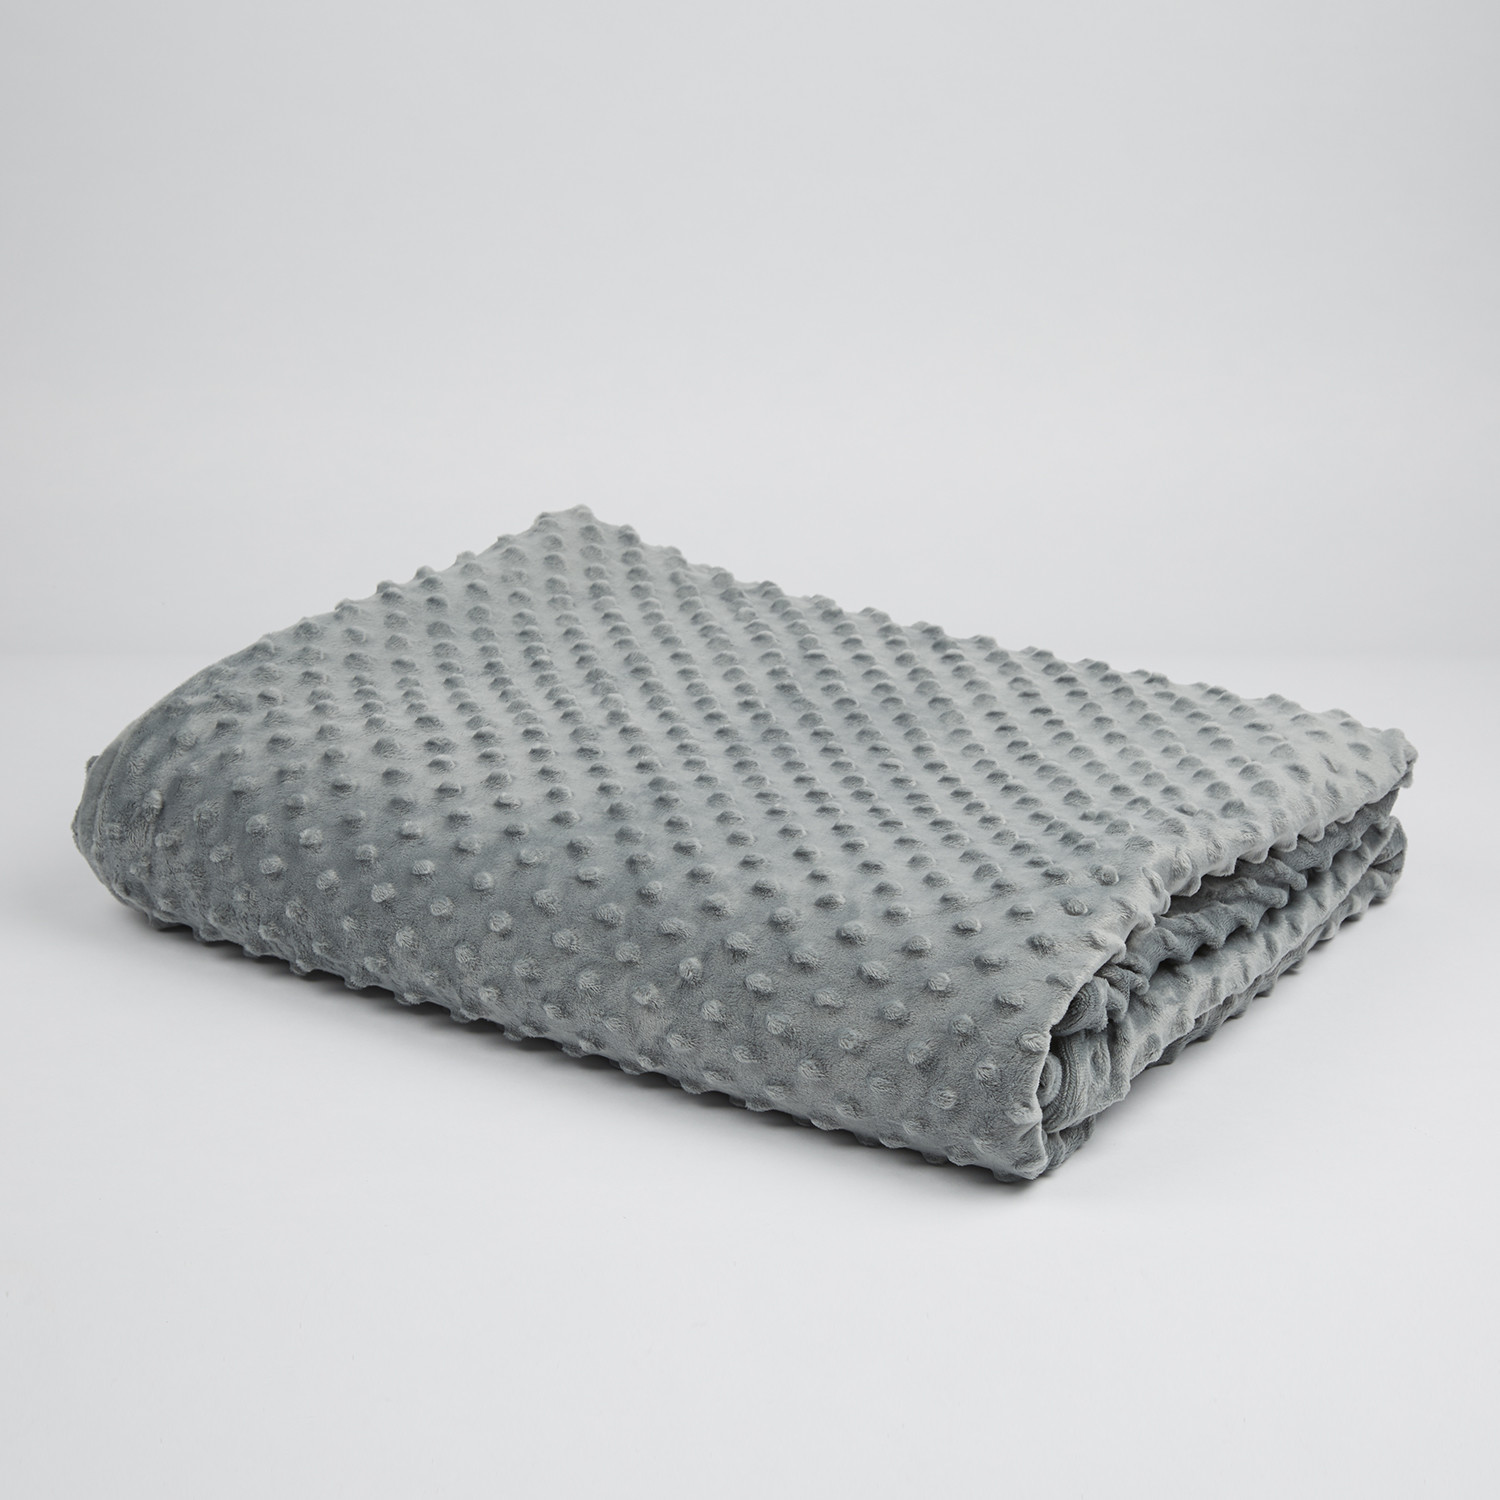 Weighted Blanket (20 lbs) - Quick Ship Event - Touch of Modern